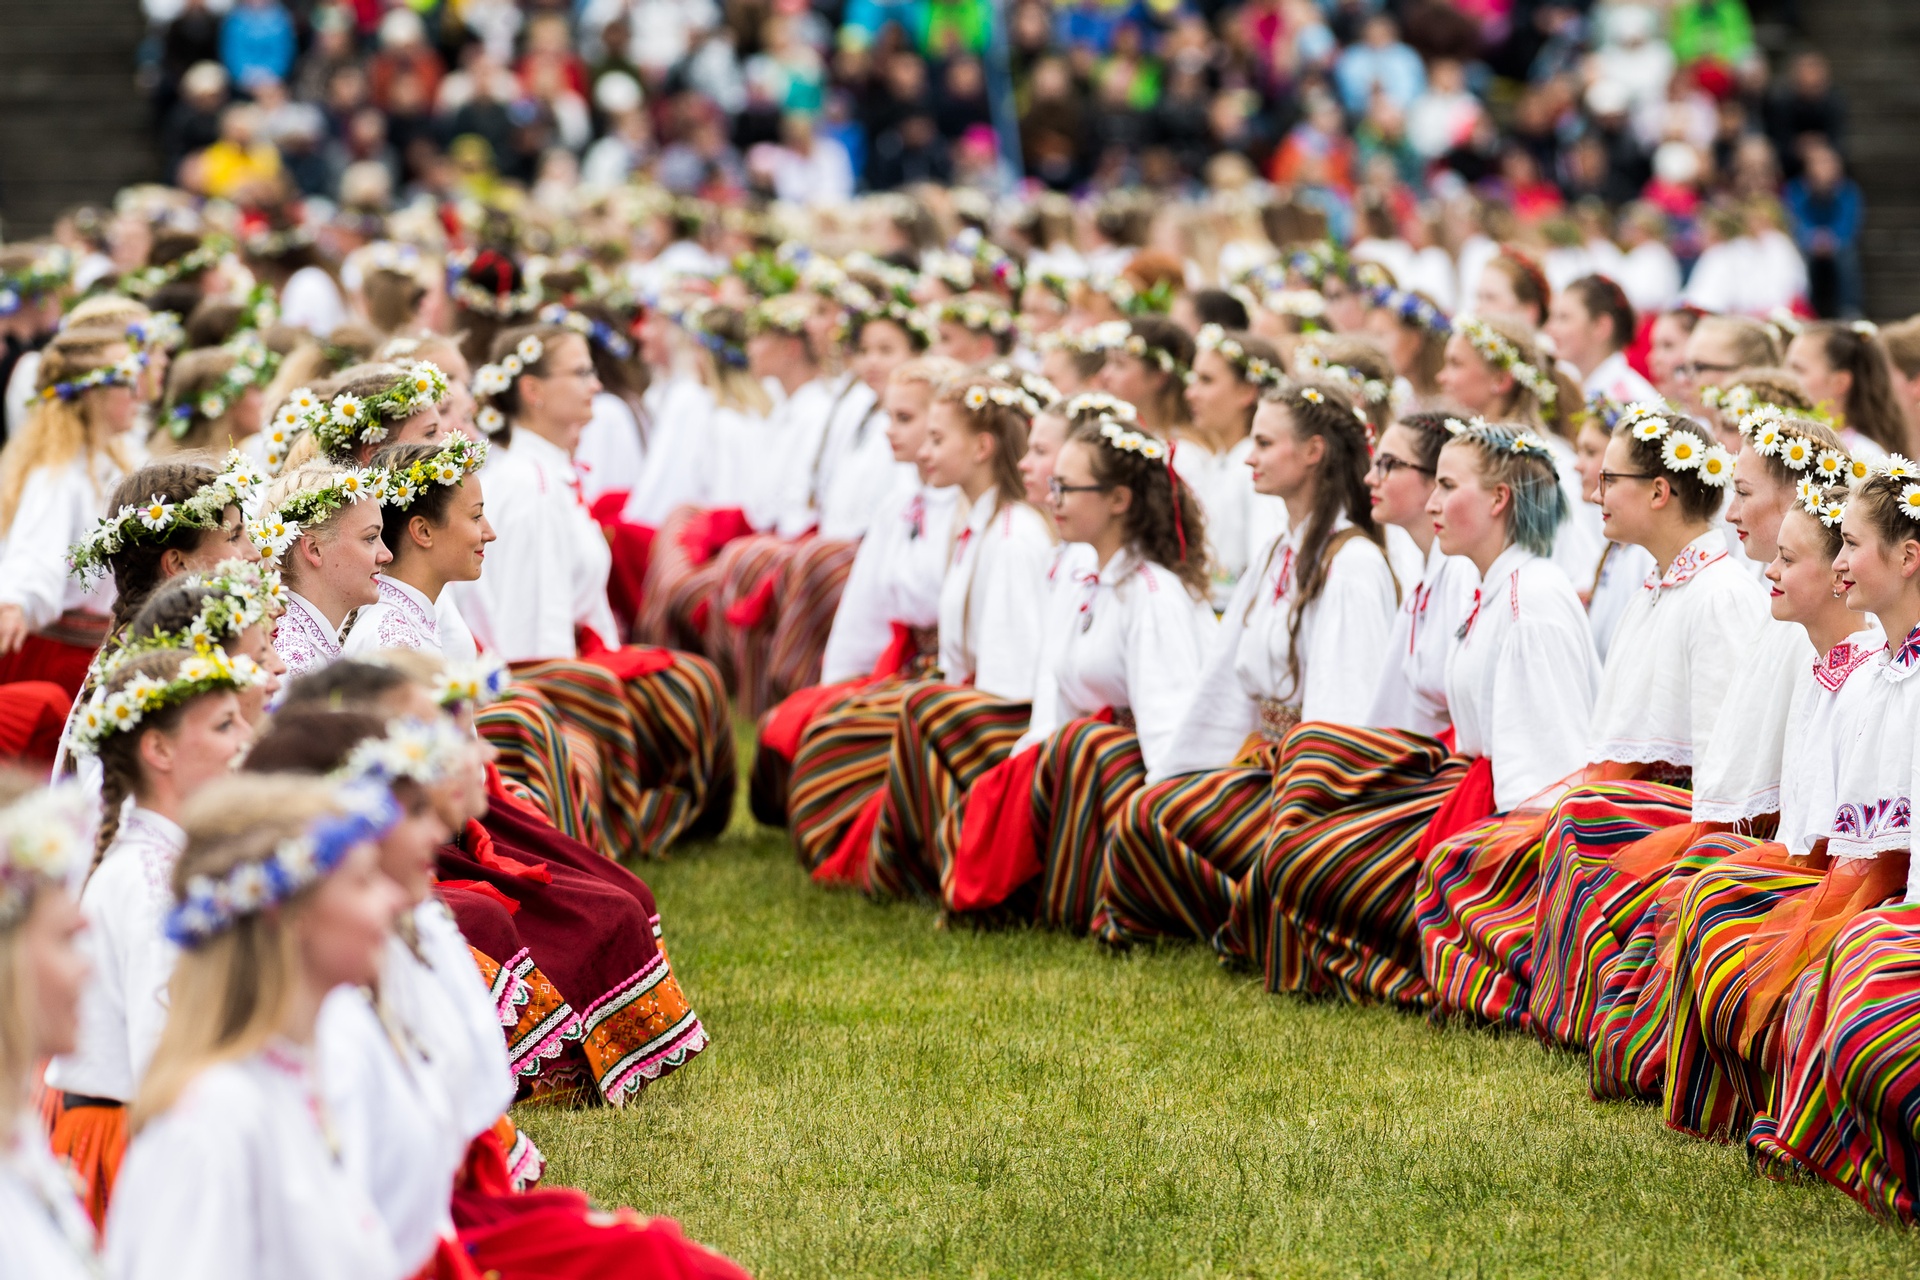 Estonian dancers in traditional red striped skirts